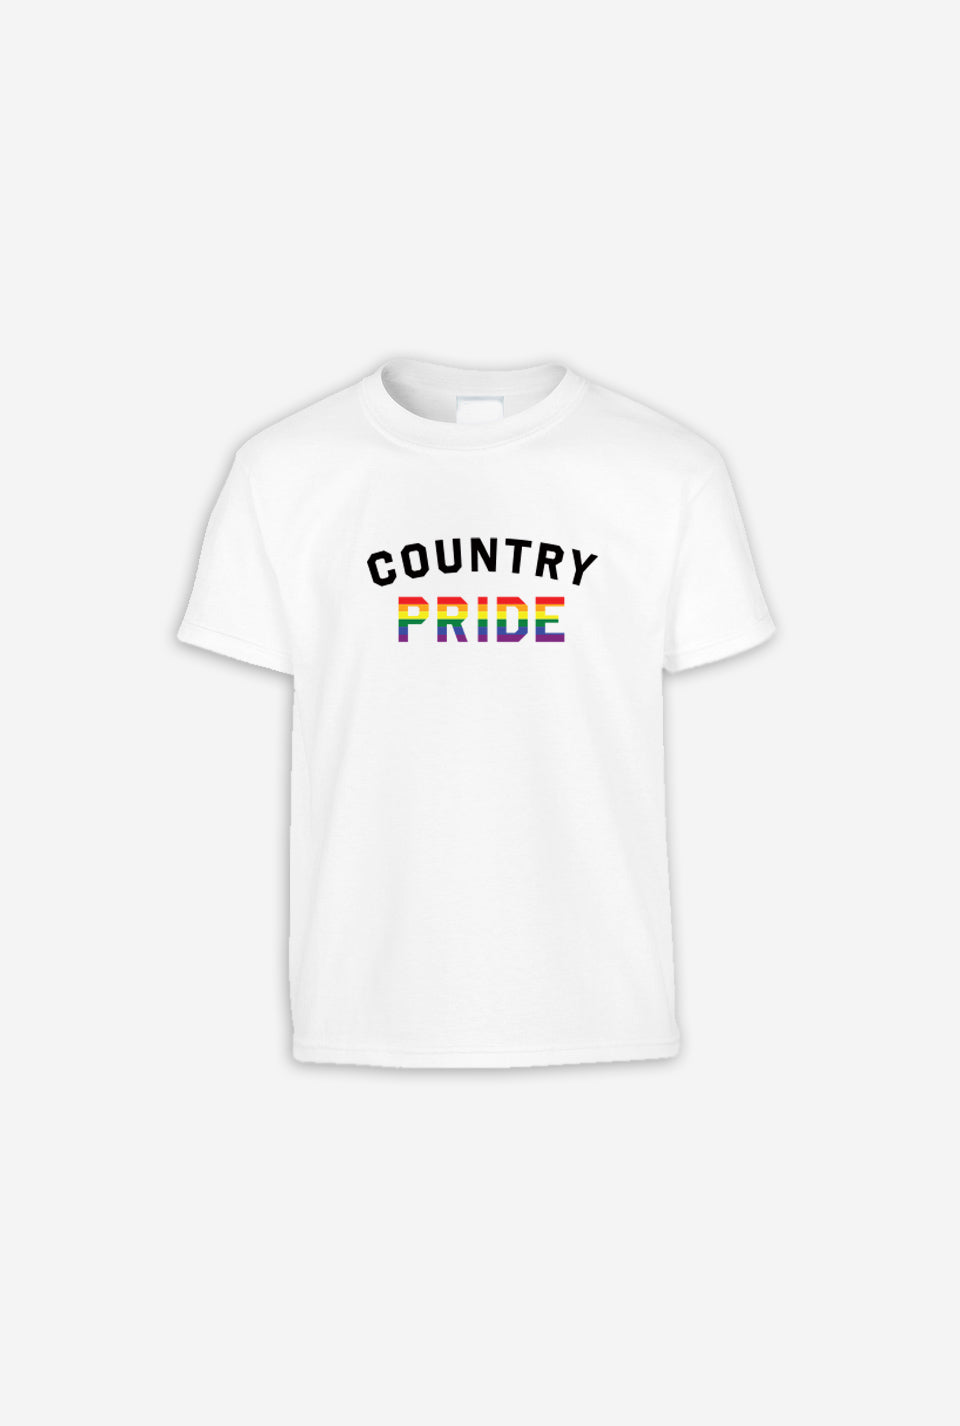 Country Pride Youth T-Shirt - White